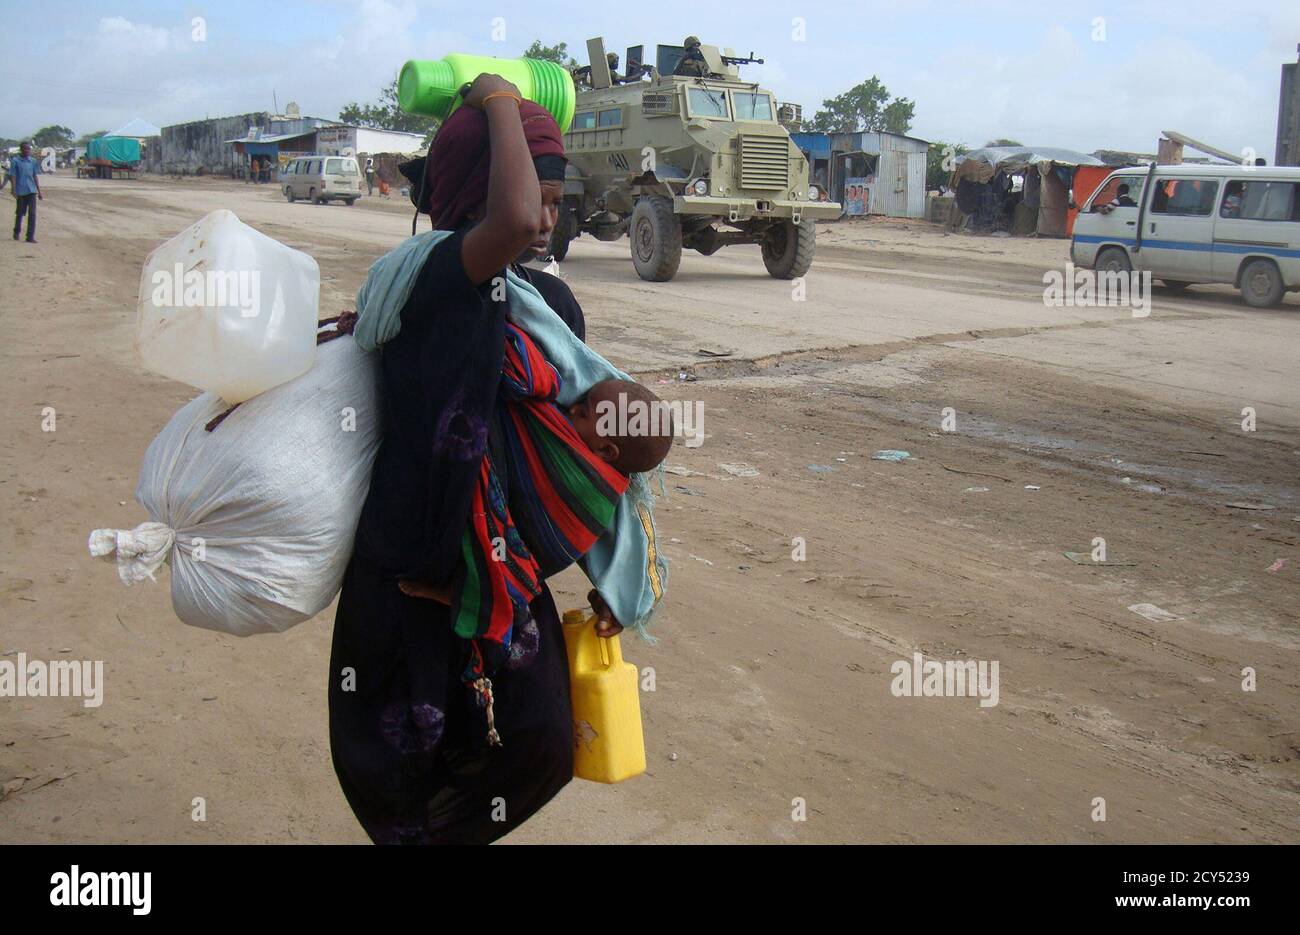 A newly displaced Somali woman carries her child and belongings as they arrive in the capital Mogadishu, August 3, 2011. The Horn of Africa food crisis shows the need to provide the world's poor with better access to family planning as part of efforts to prevent future tragedies, the head of the United Nations Population Fund (UNFPA) said. REUTERS/Feisal Omar (SOMALIA - Tags: SOCIETY ENVIRONMENT DISASTER) Stock Photo